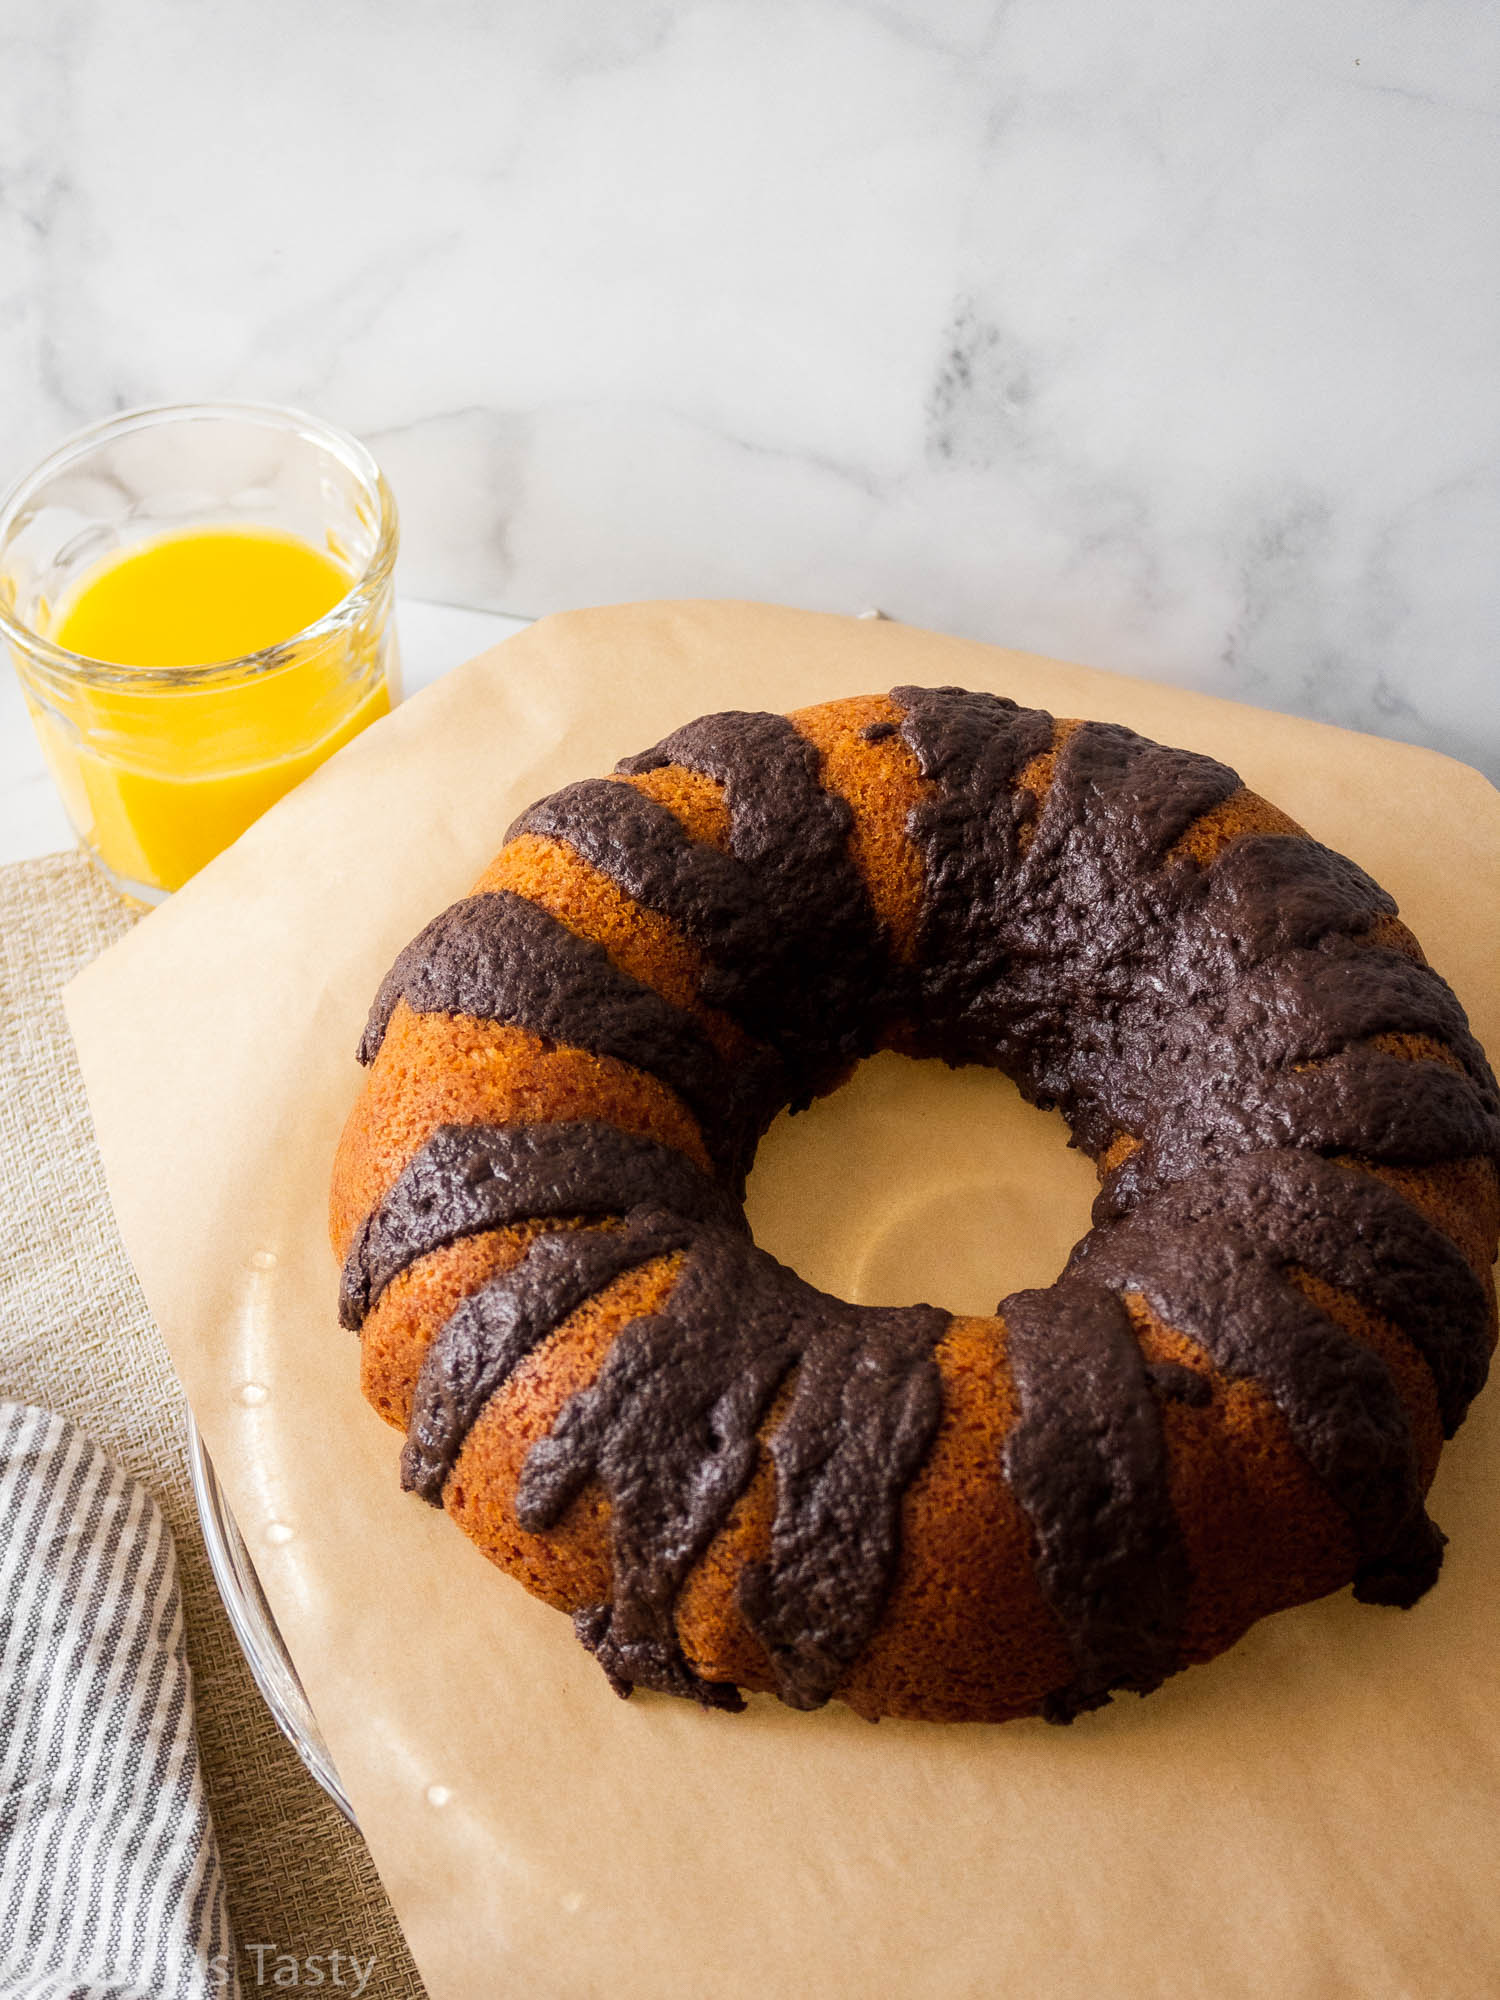 Orange bundt cake topped with chocolate drizzle on brown parchment paper. 